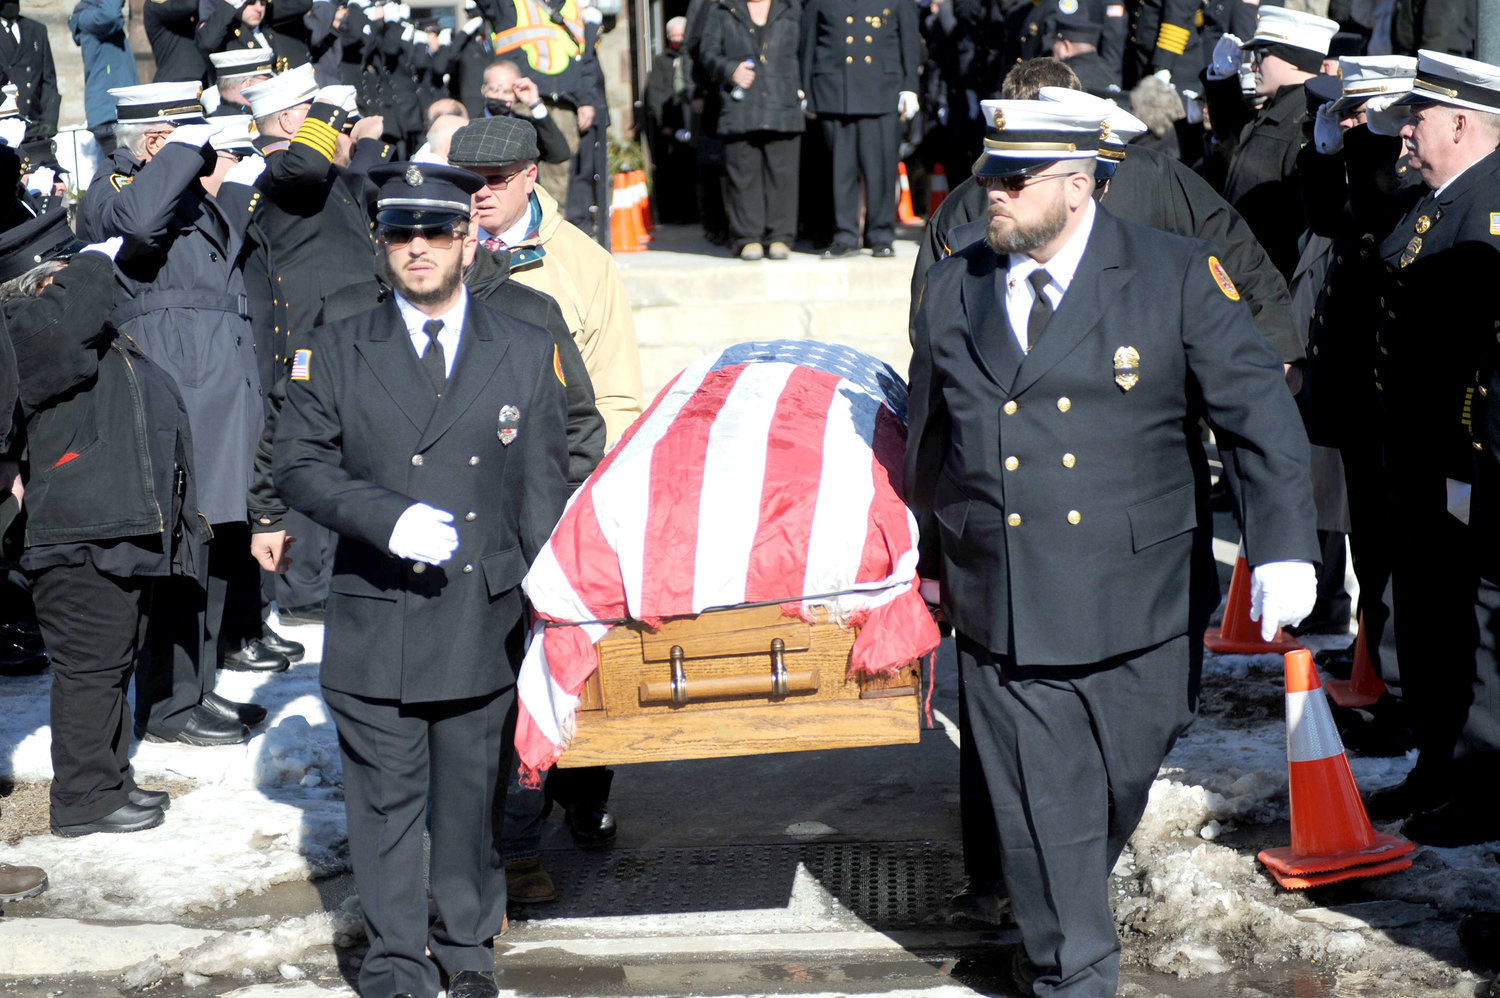 Last call to action. Members of the Forestburgh Volunteer Fire Department escort one of their own to his final place of rest on earth.